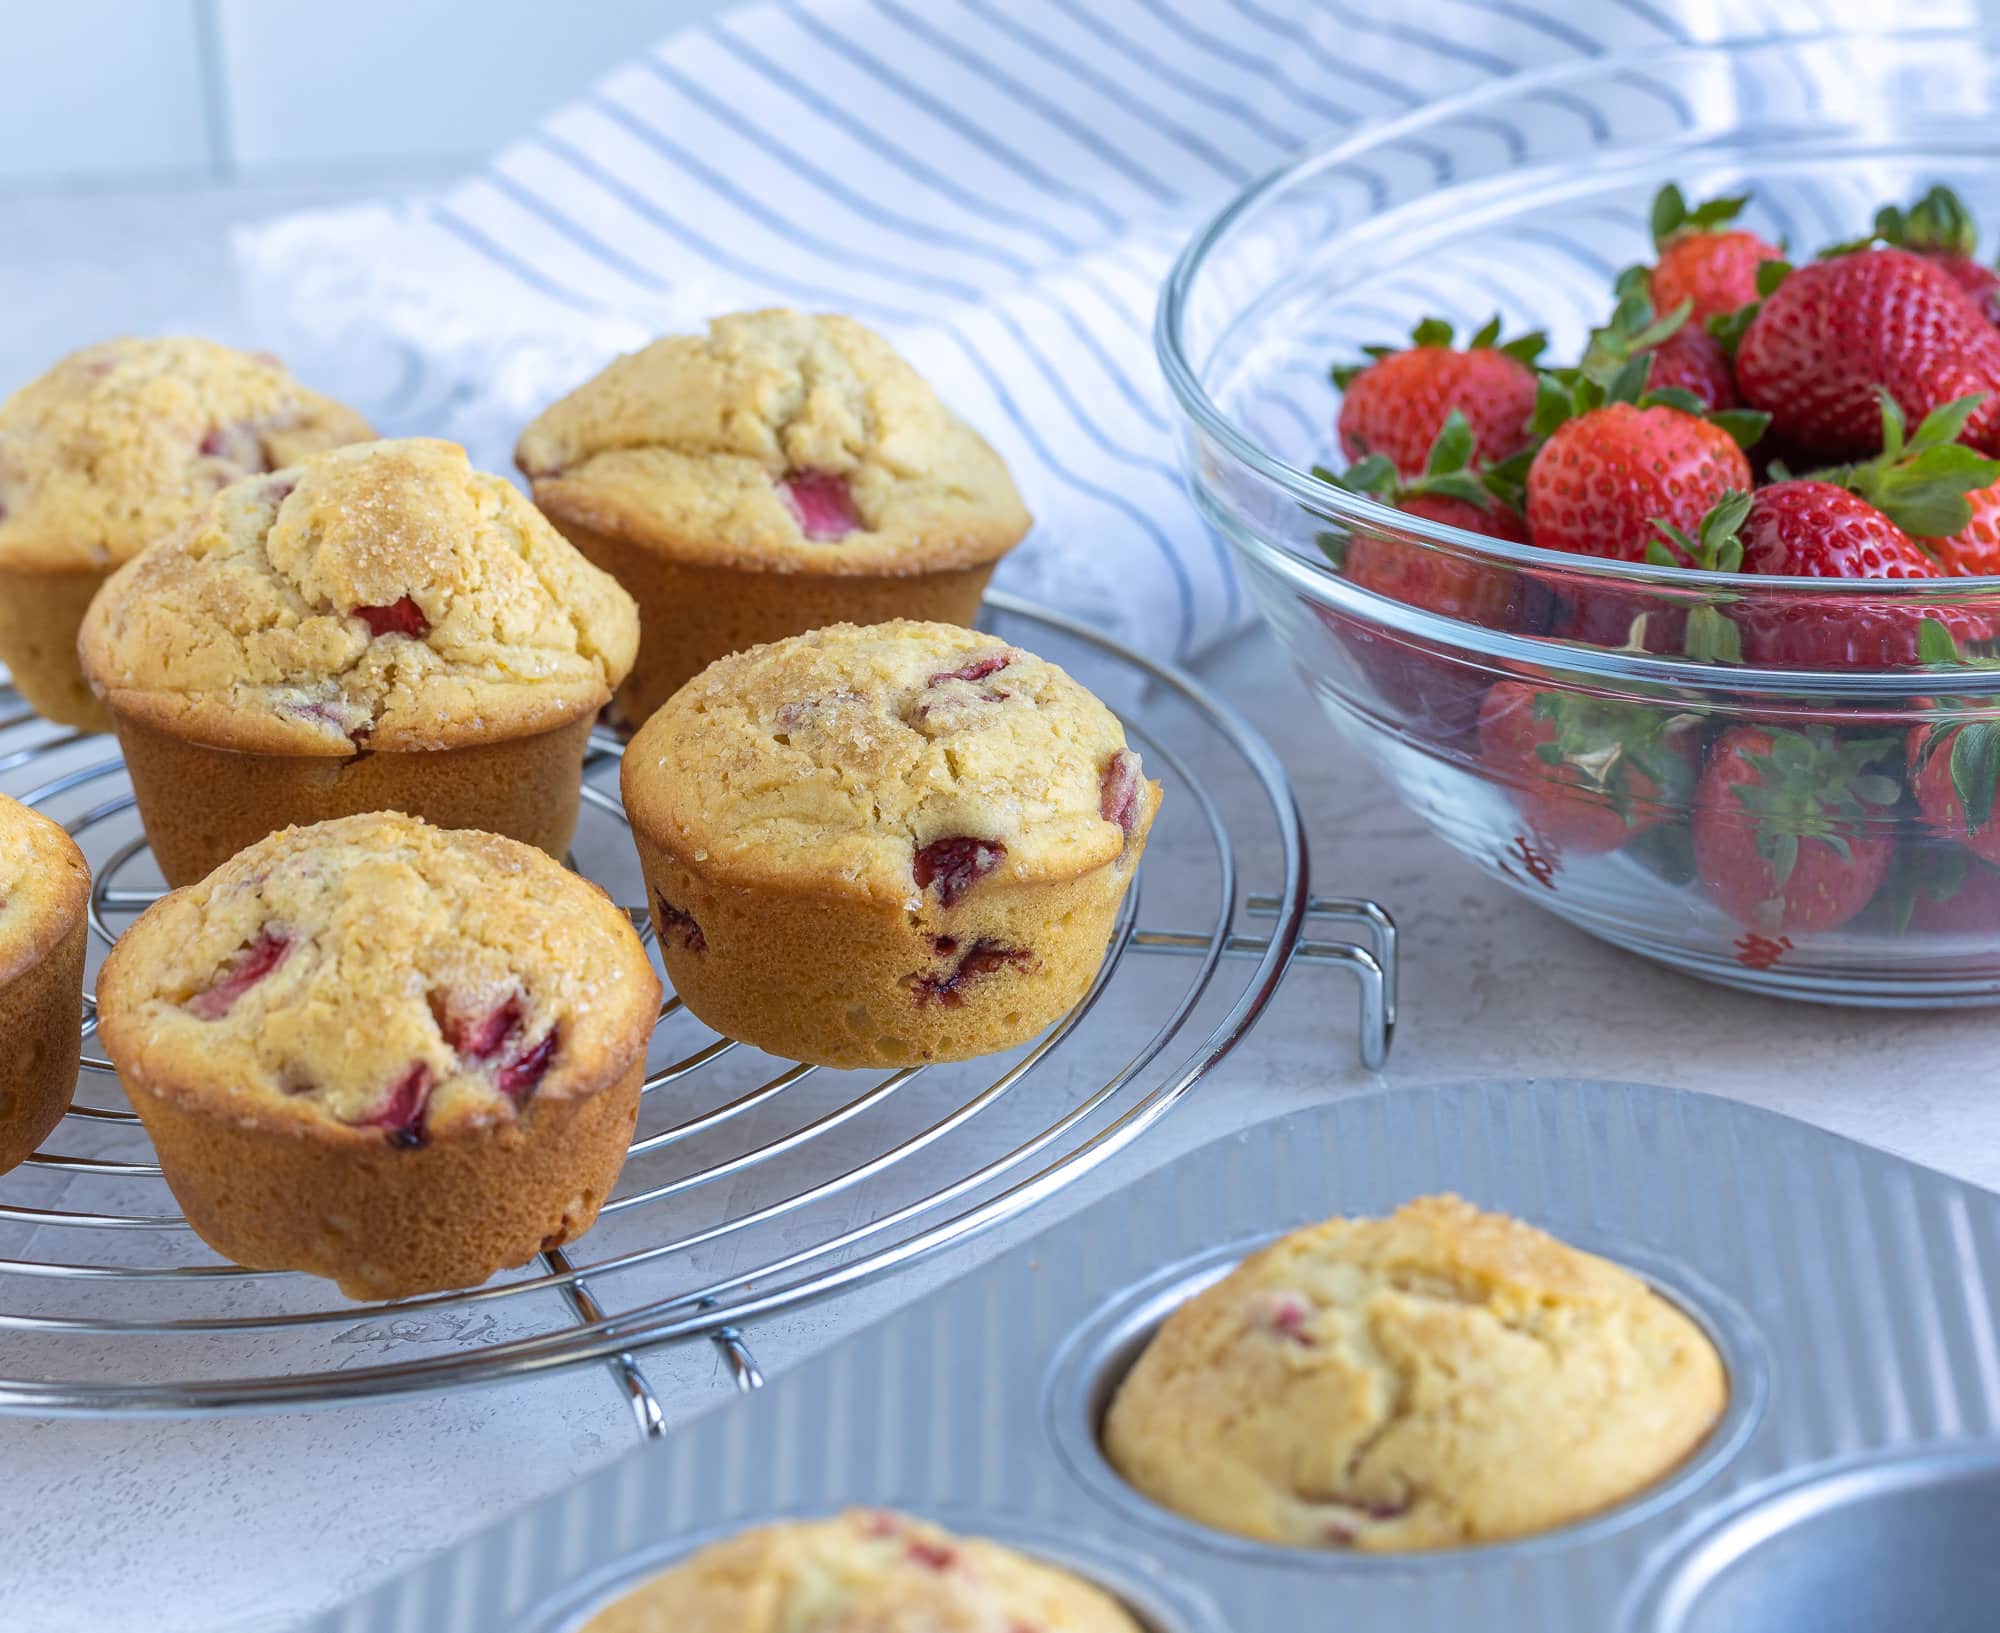 Golden muffins cooling on a rack with a bowl of berries.